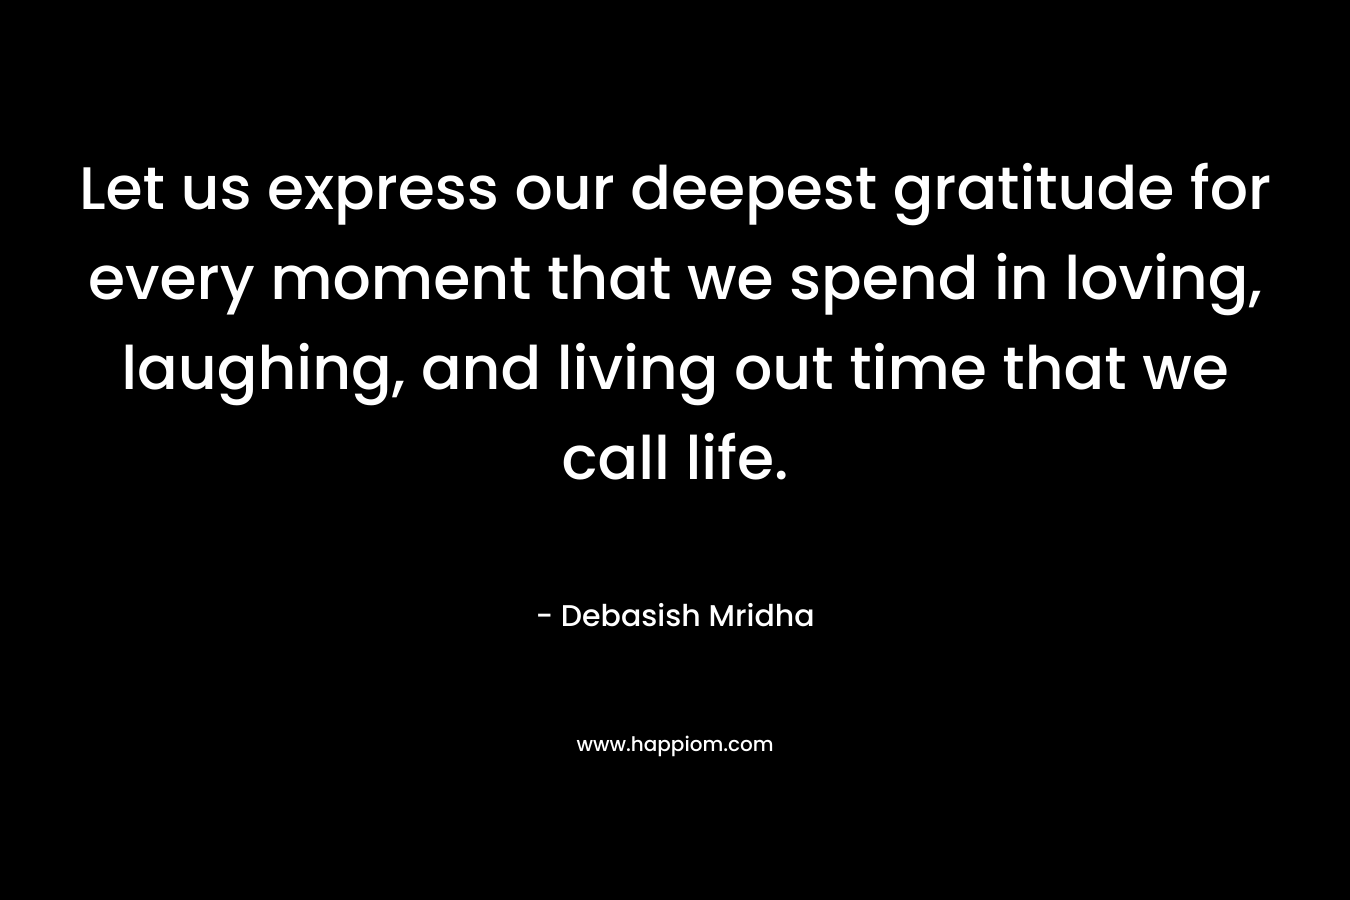 Let us express our deepest gratitude for every moment that we spend in loving, laughing, and living out time that we call life.